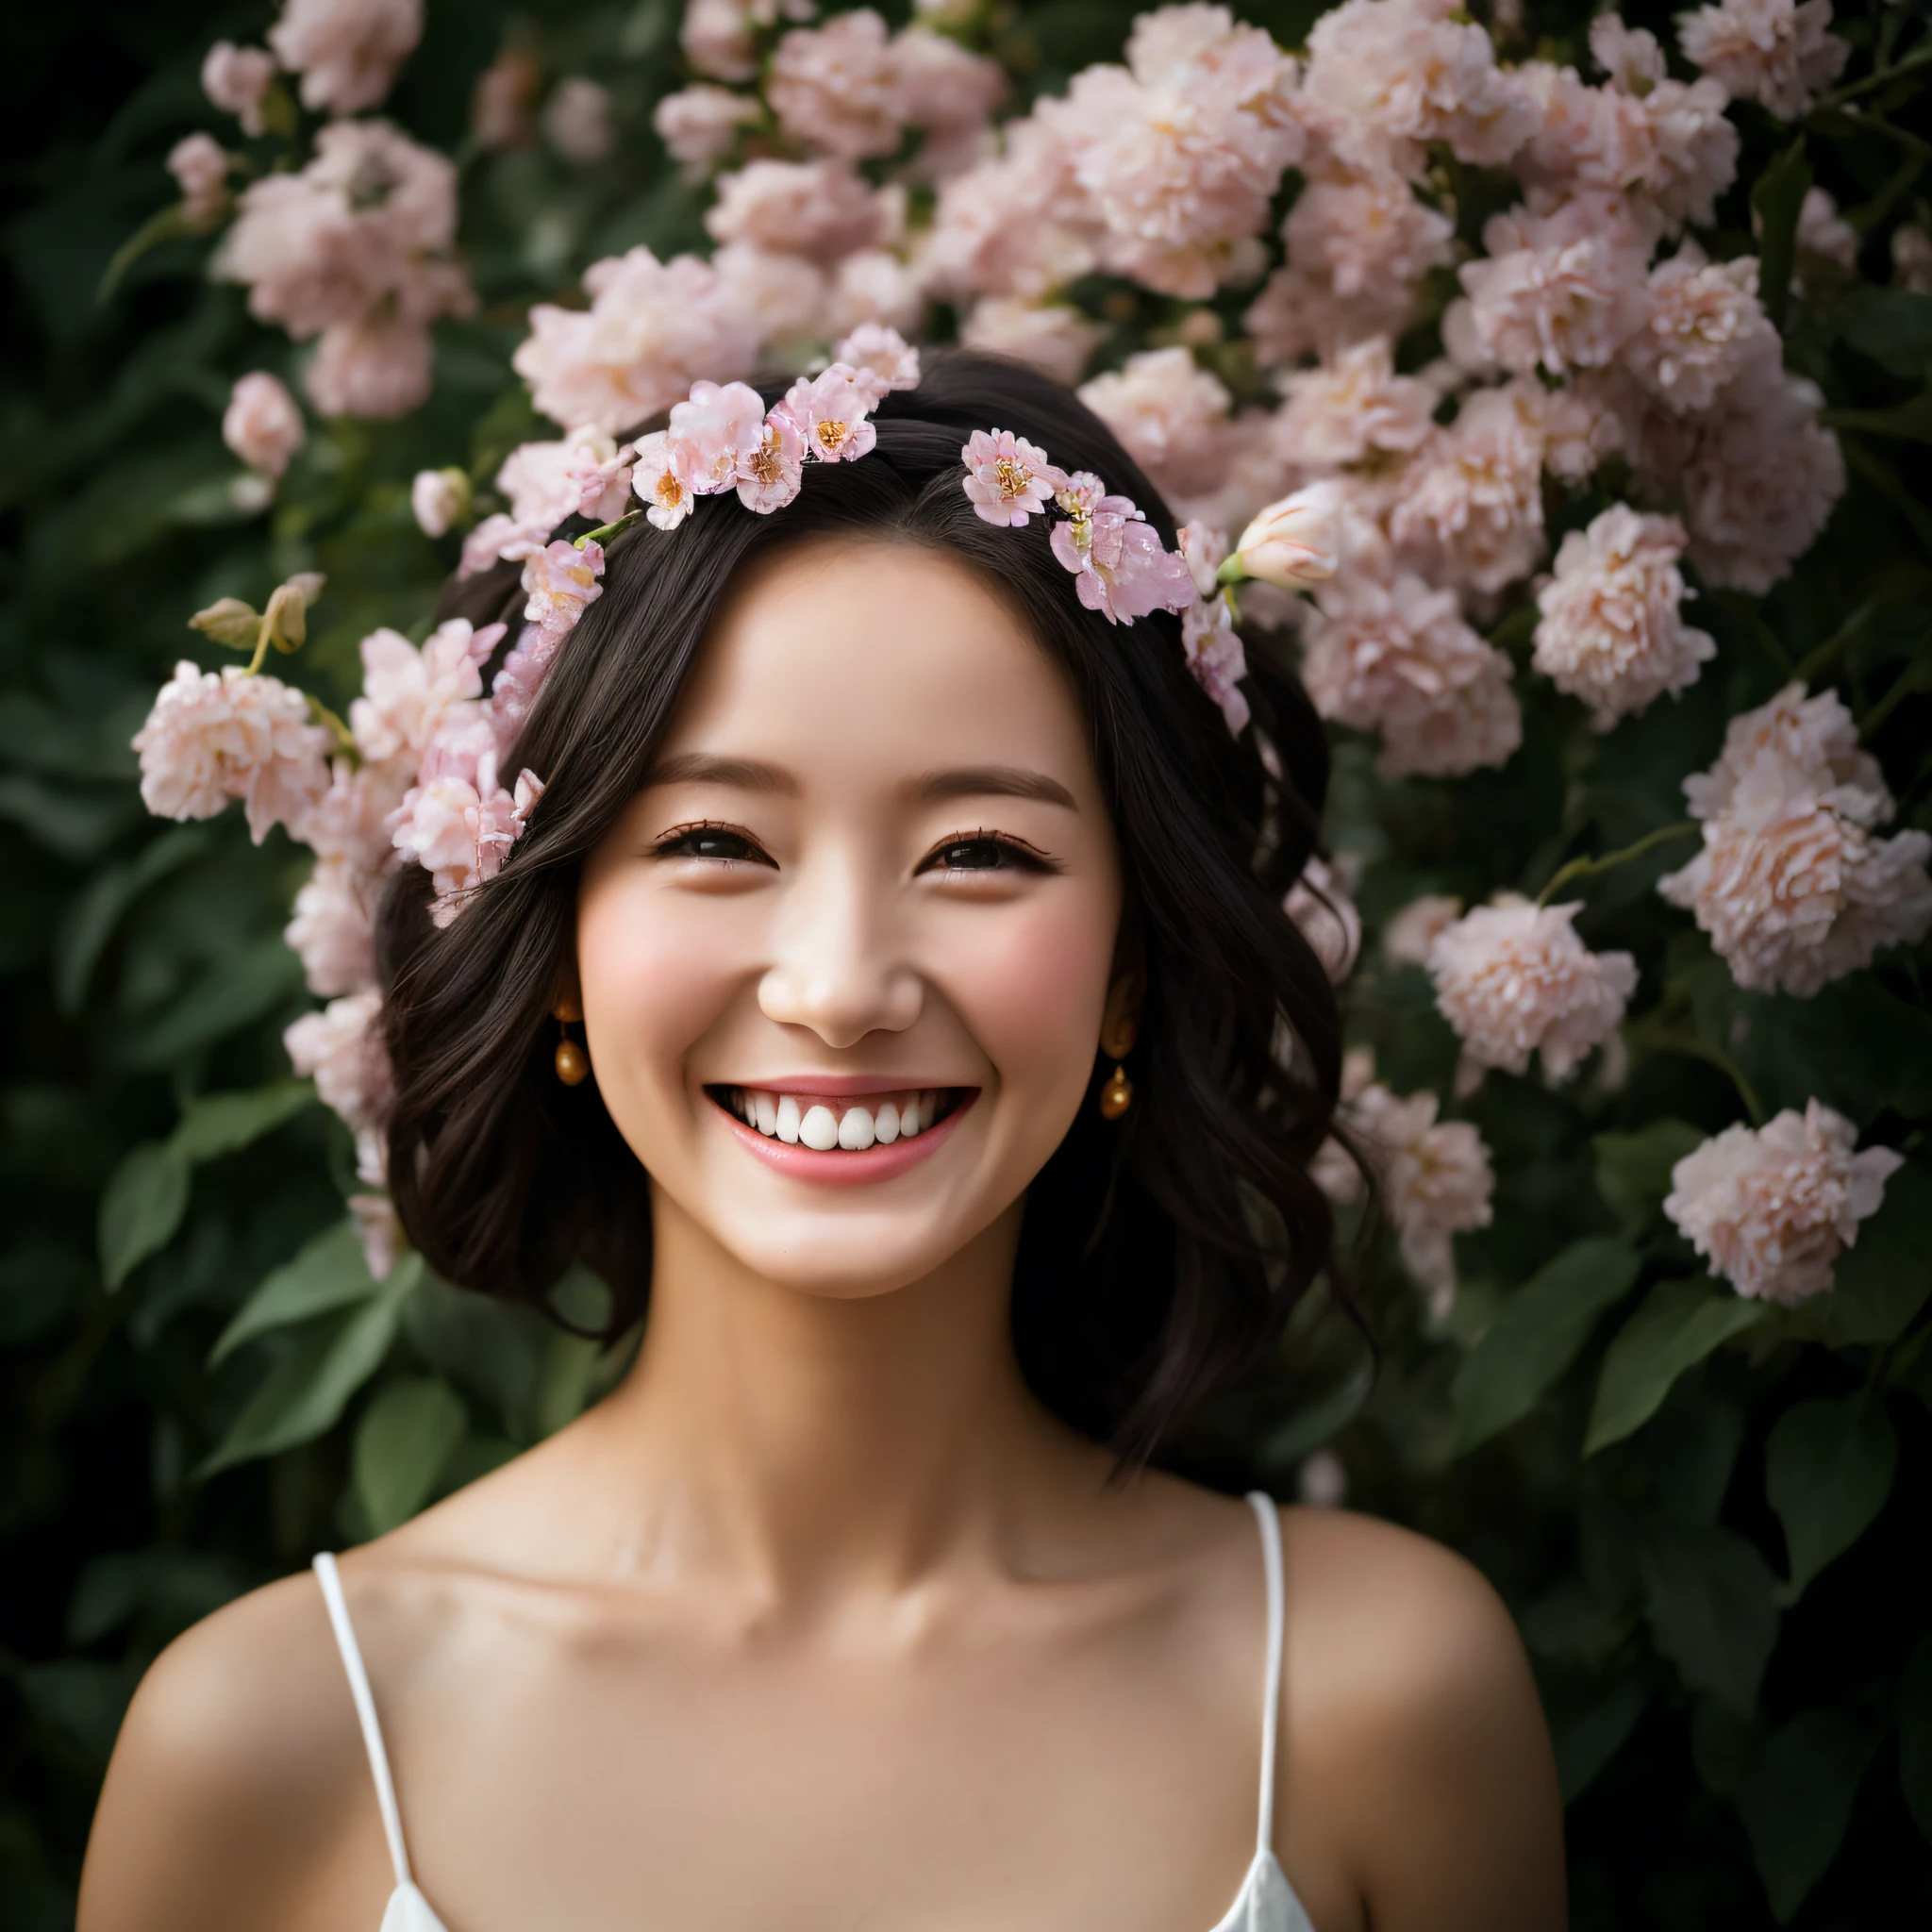 Beautiful woman with flowers and a crown of flowers in her hair, (smiling as much as possible:1.5), hair flyer, (black hair: 1.5), (black eyes: 1.5), (Japan people: 1.0), flower storm portrait, flower woman, hair flower, hair flower, flower girl, flower goddess, beautiful portrait photo, girl with flower head, perky woman made of petals, portrait of a woman with flowers, Girl at the front of the flower garden